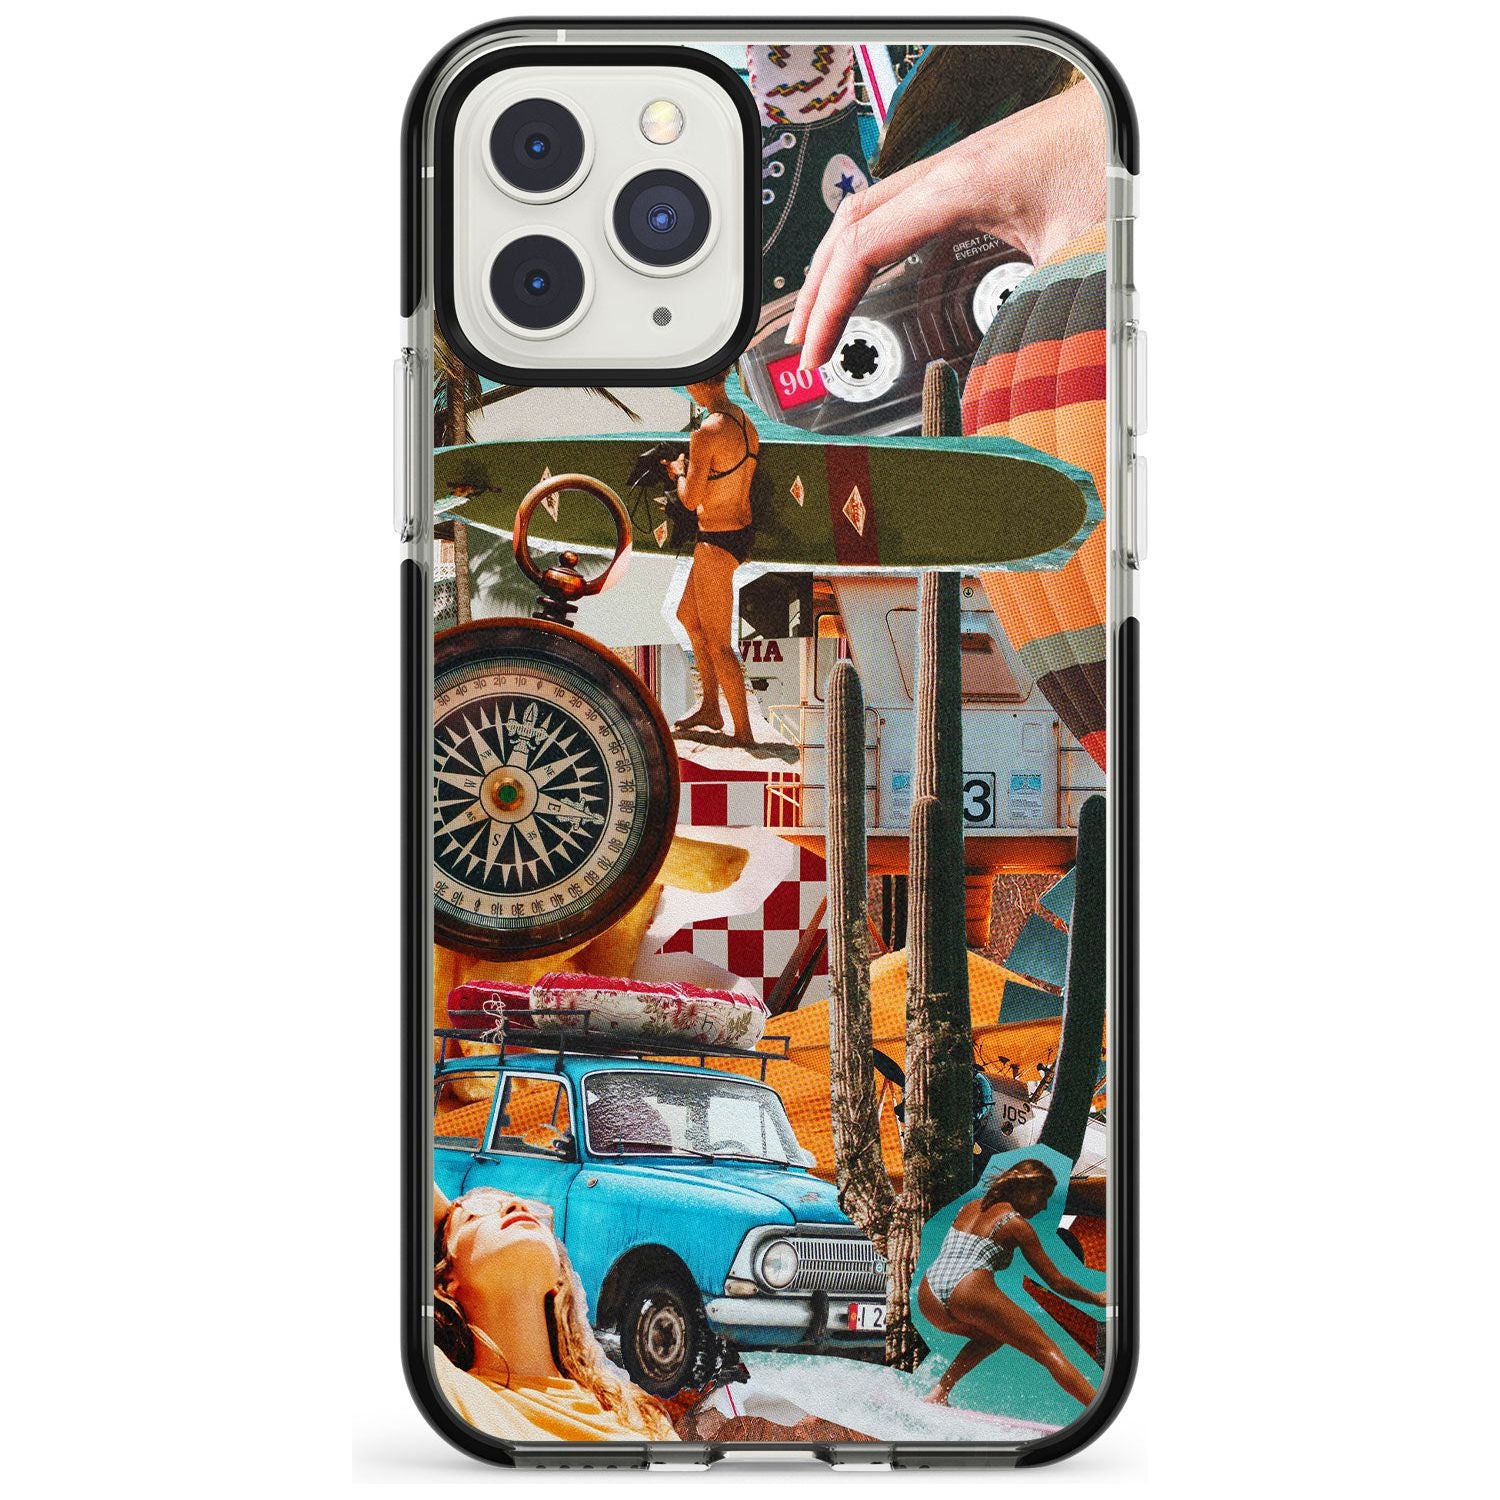 Vintage Collage: Road Trip Black Impact Phone Case for iPhone 11 Pro Max